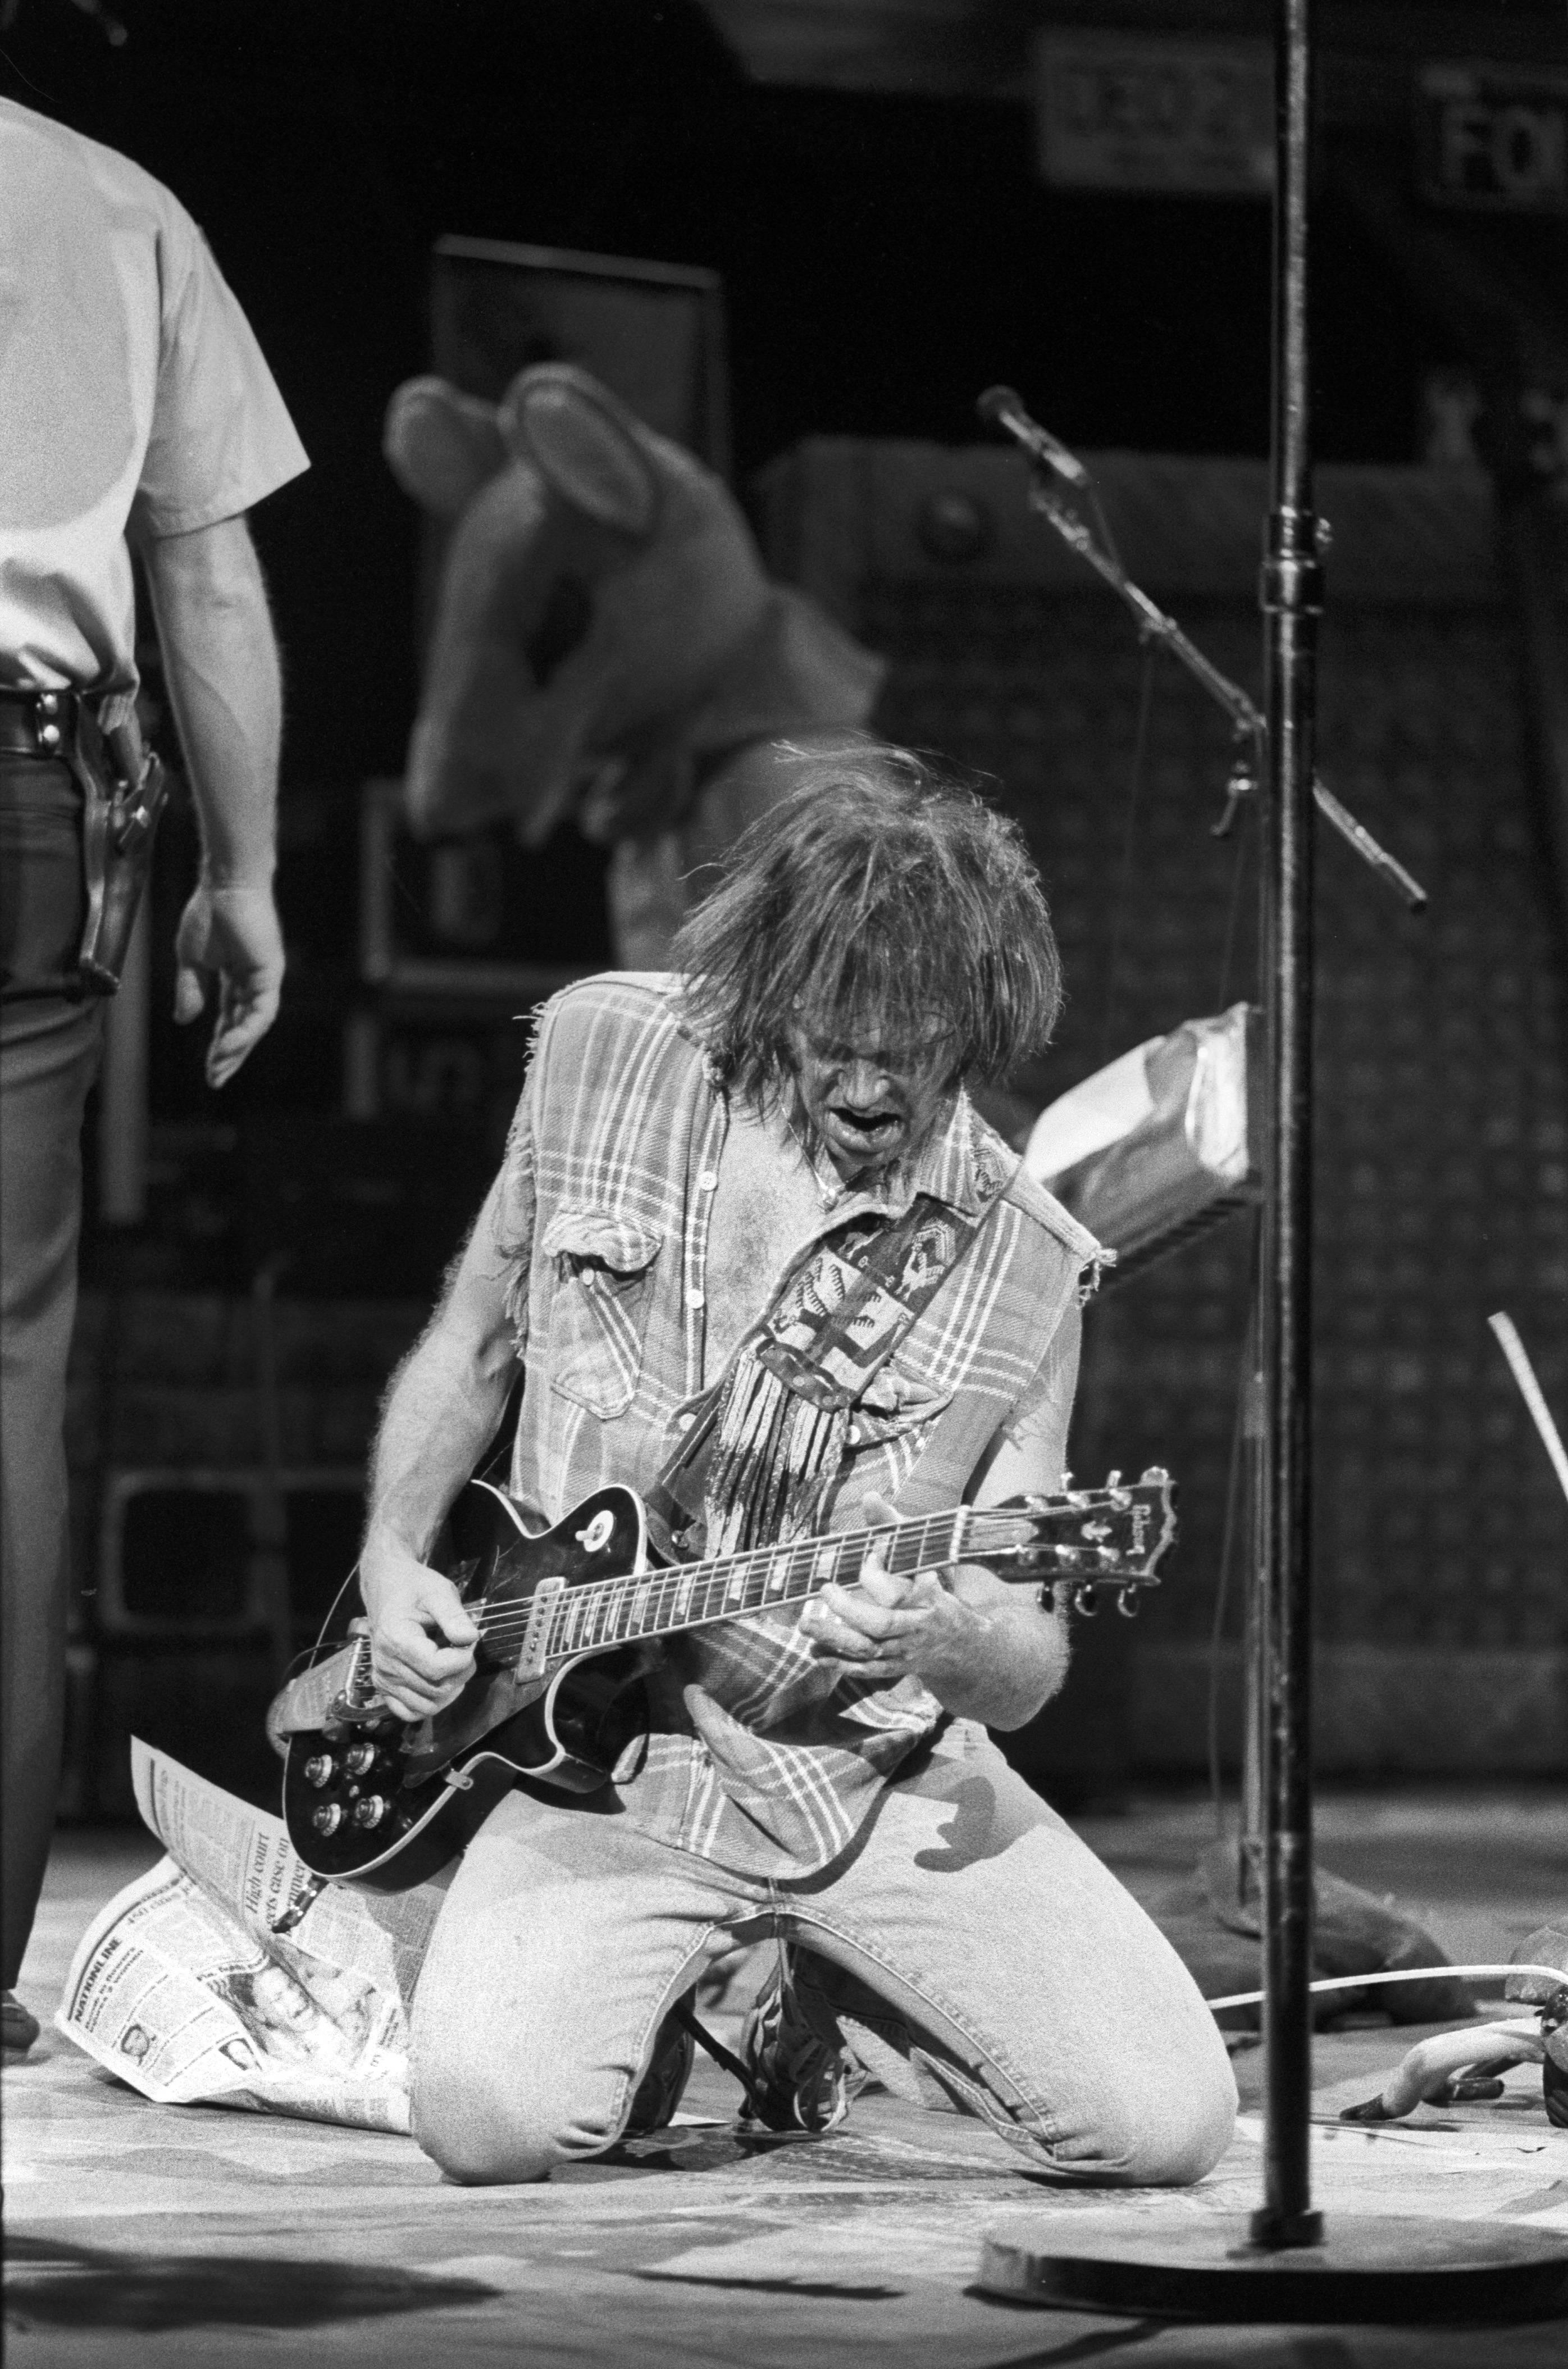 David Plastik Portrait Photograph - Neil Young Rocking Out on Stage, Falling to Knees Fine Art Print